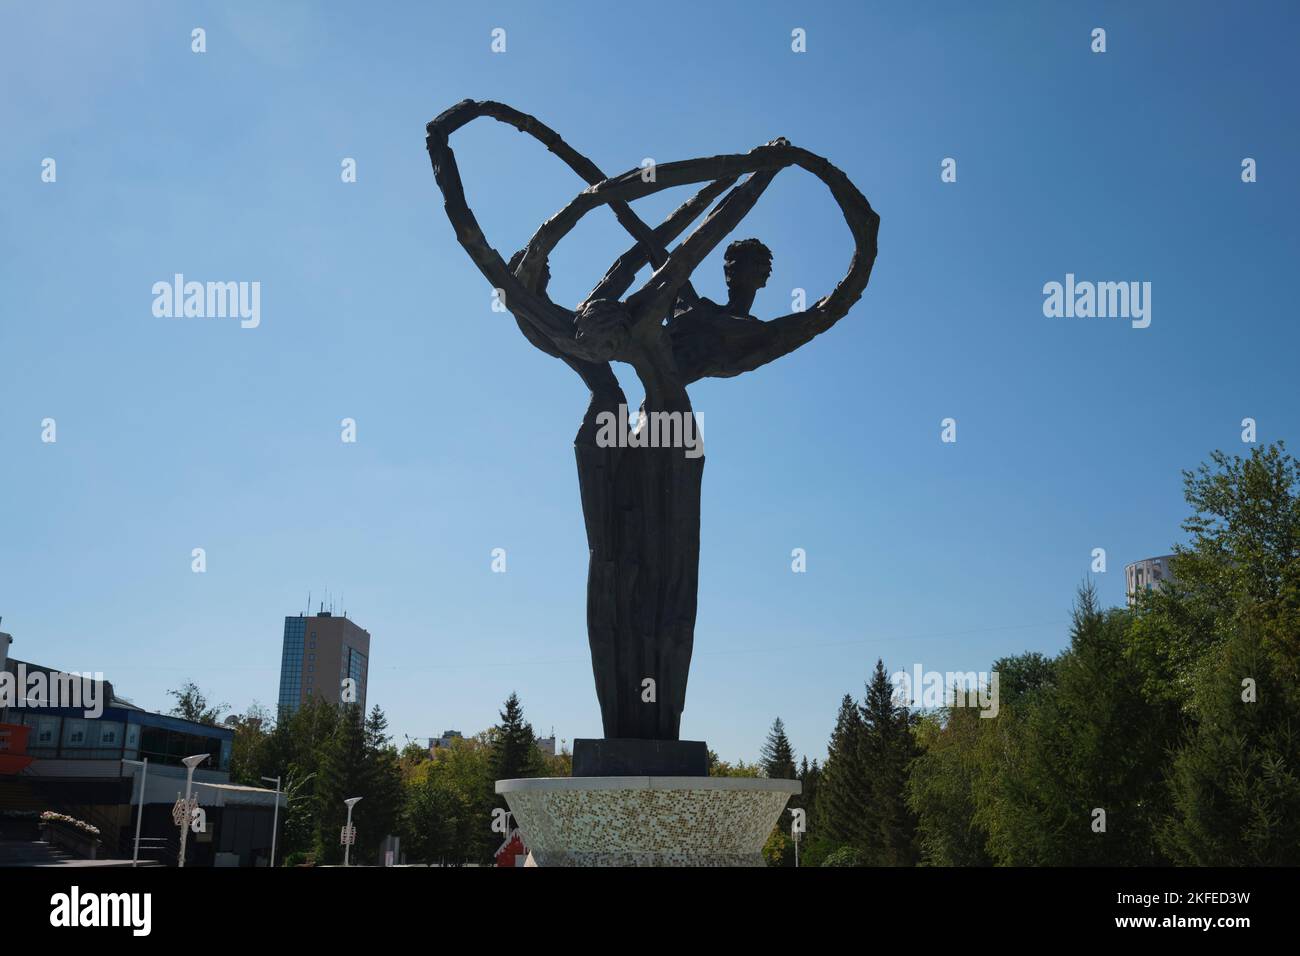 A view of the semi-abstract design of people with interwined arms. At the Friendship Of Peoples Monument statue, sculpture in Astana, Nur Sultan, Kaza Stock Photo